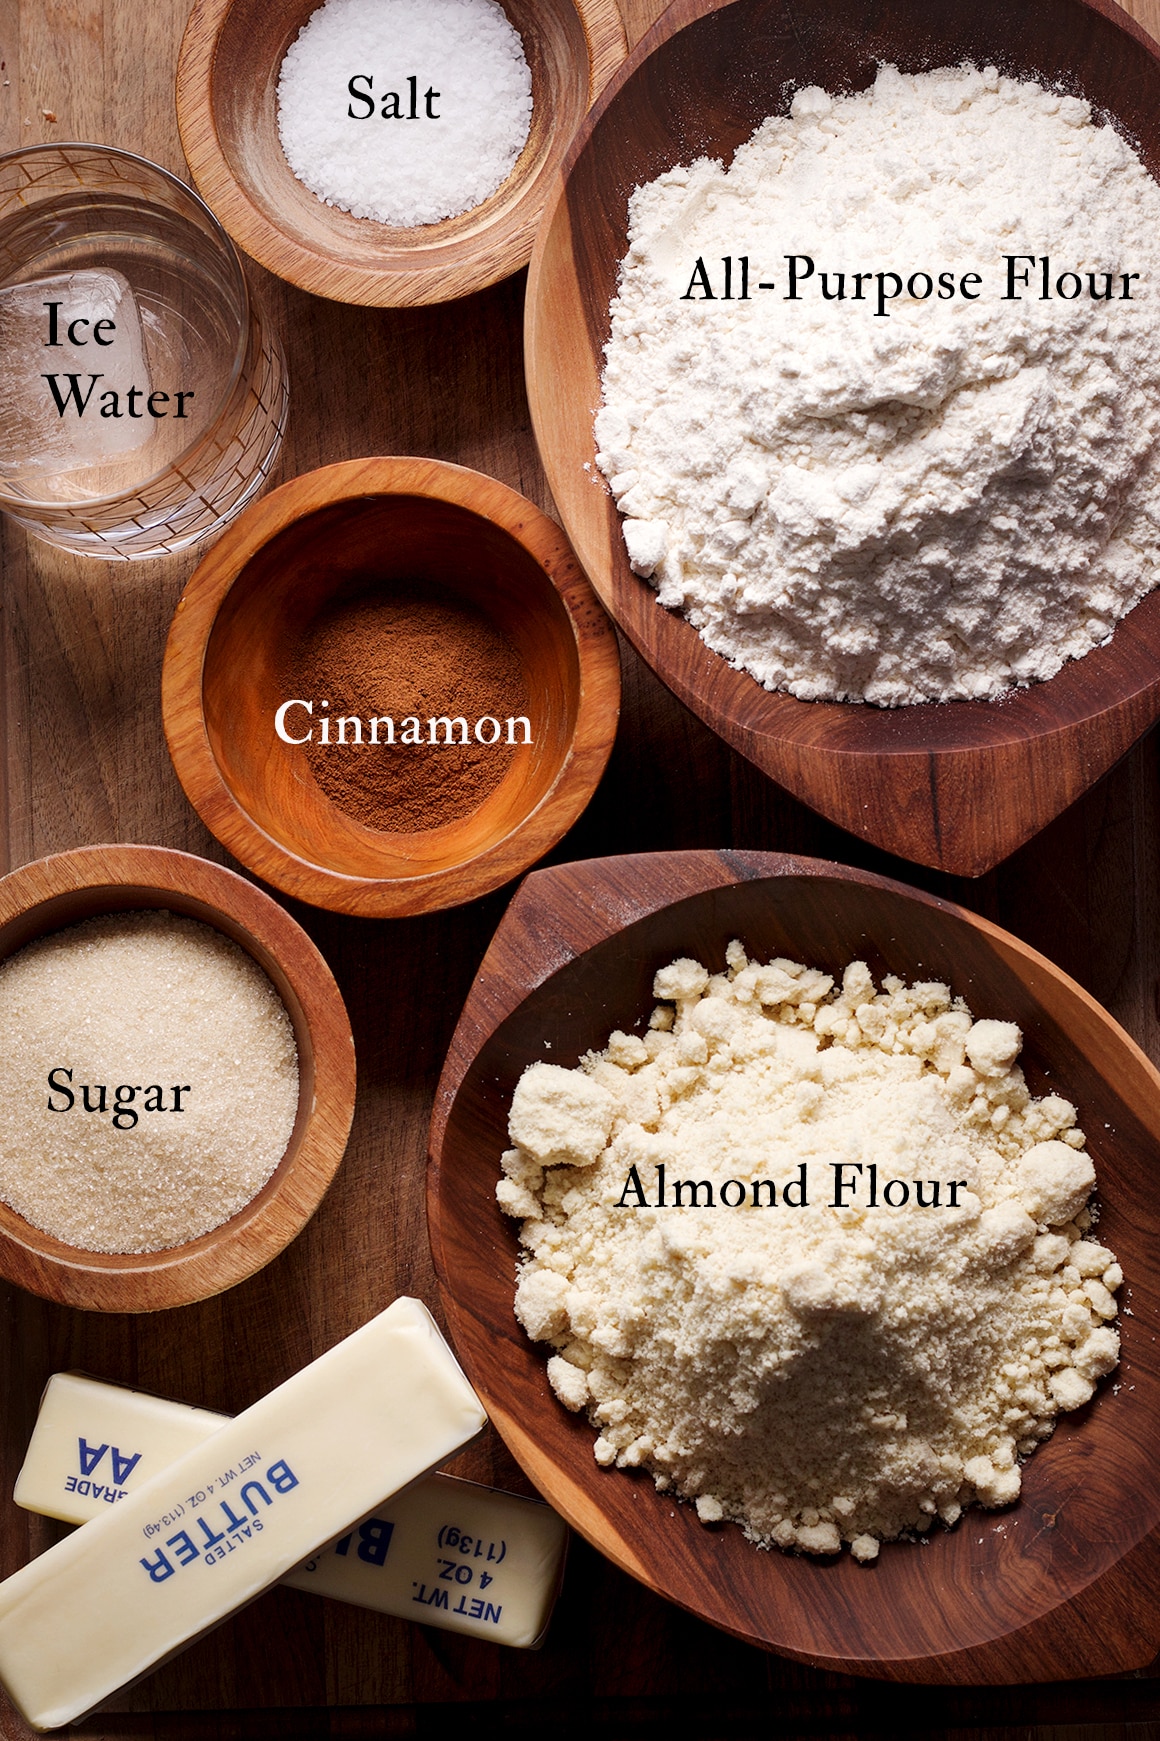 All the ingredients needed to make toasted almond pie crust dough.